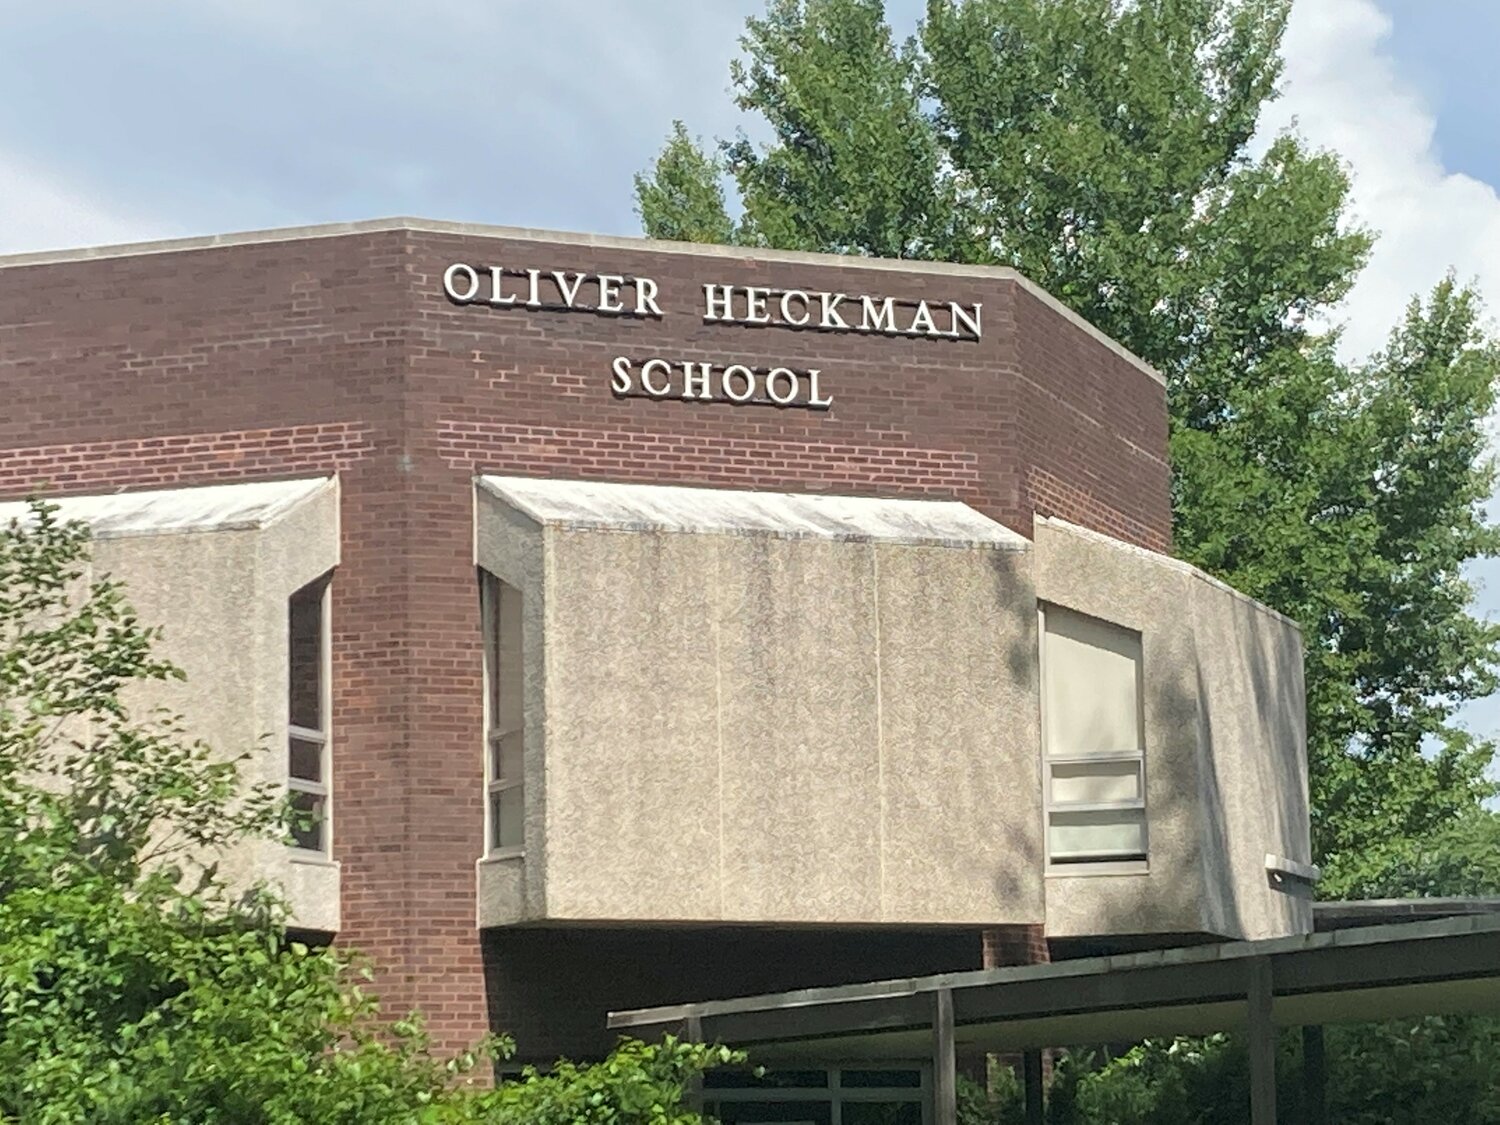 The Neshaminy School Board will consider proceeding with a $3.2 million sale of the closed Oliver Heckman Elementary School at Tuesday night’s meeting.